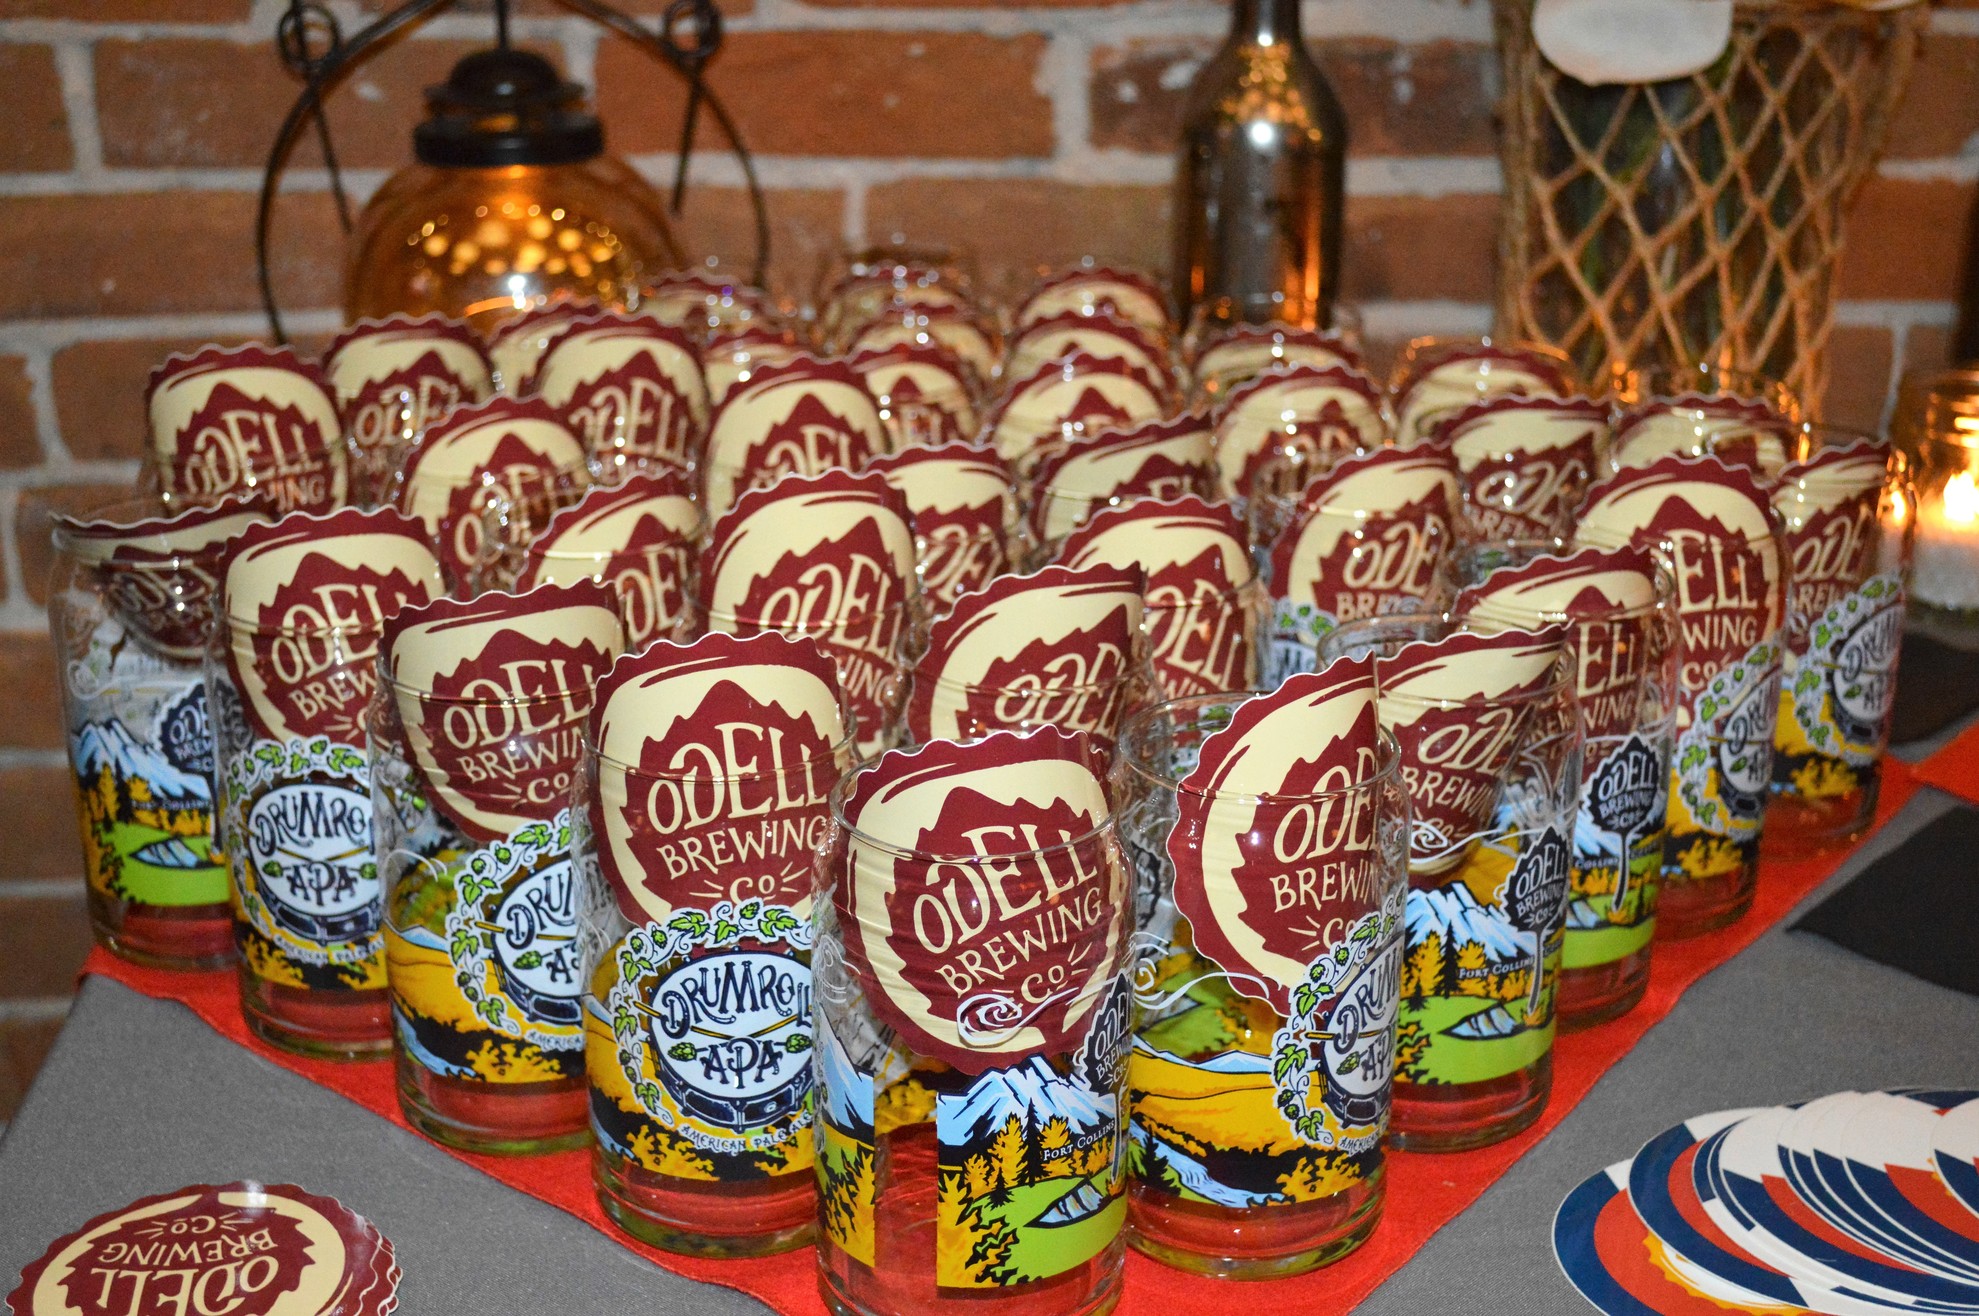 Event Recap | Mainline Ale House & Odell Brewing Co. Fall Beer Dinner